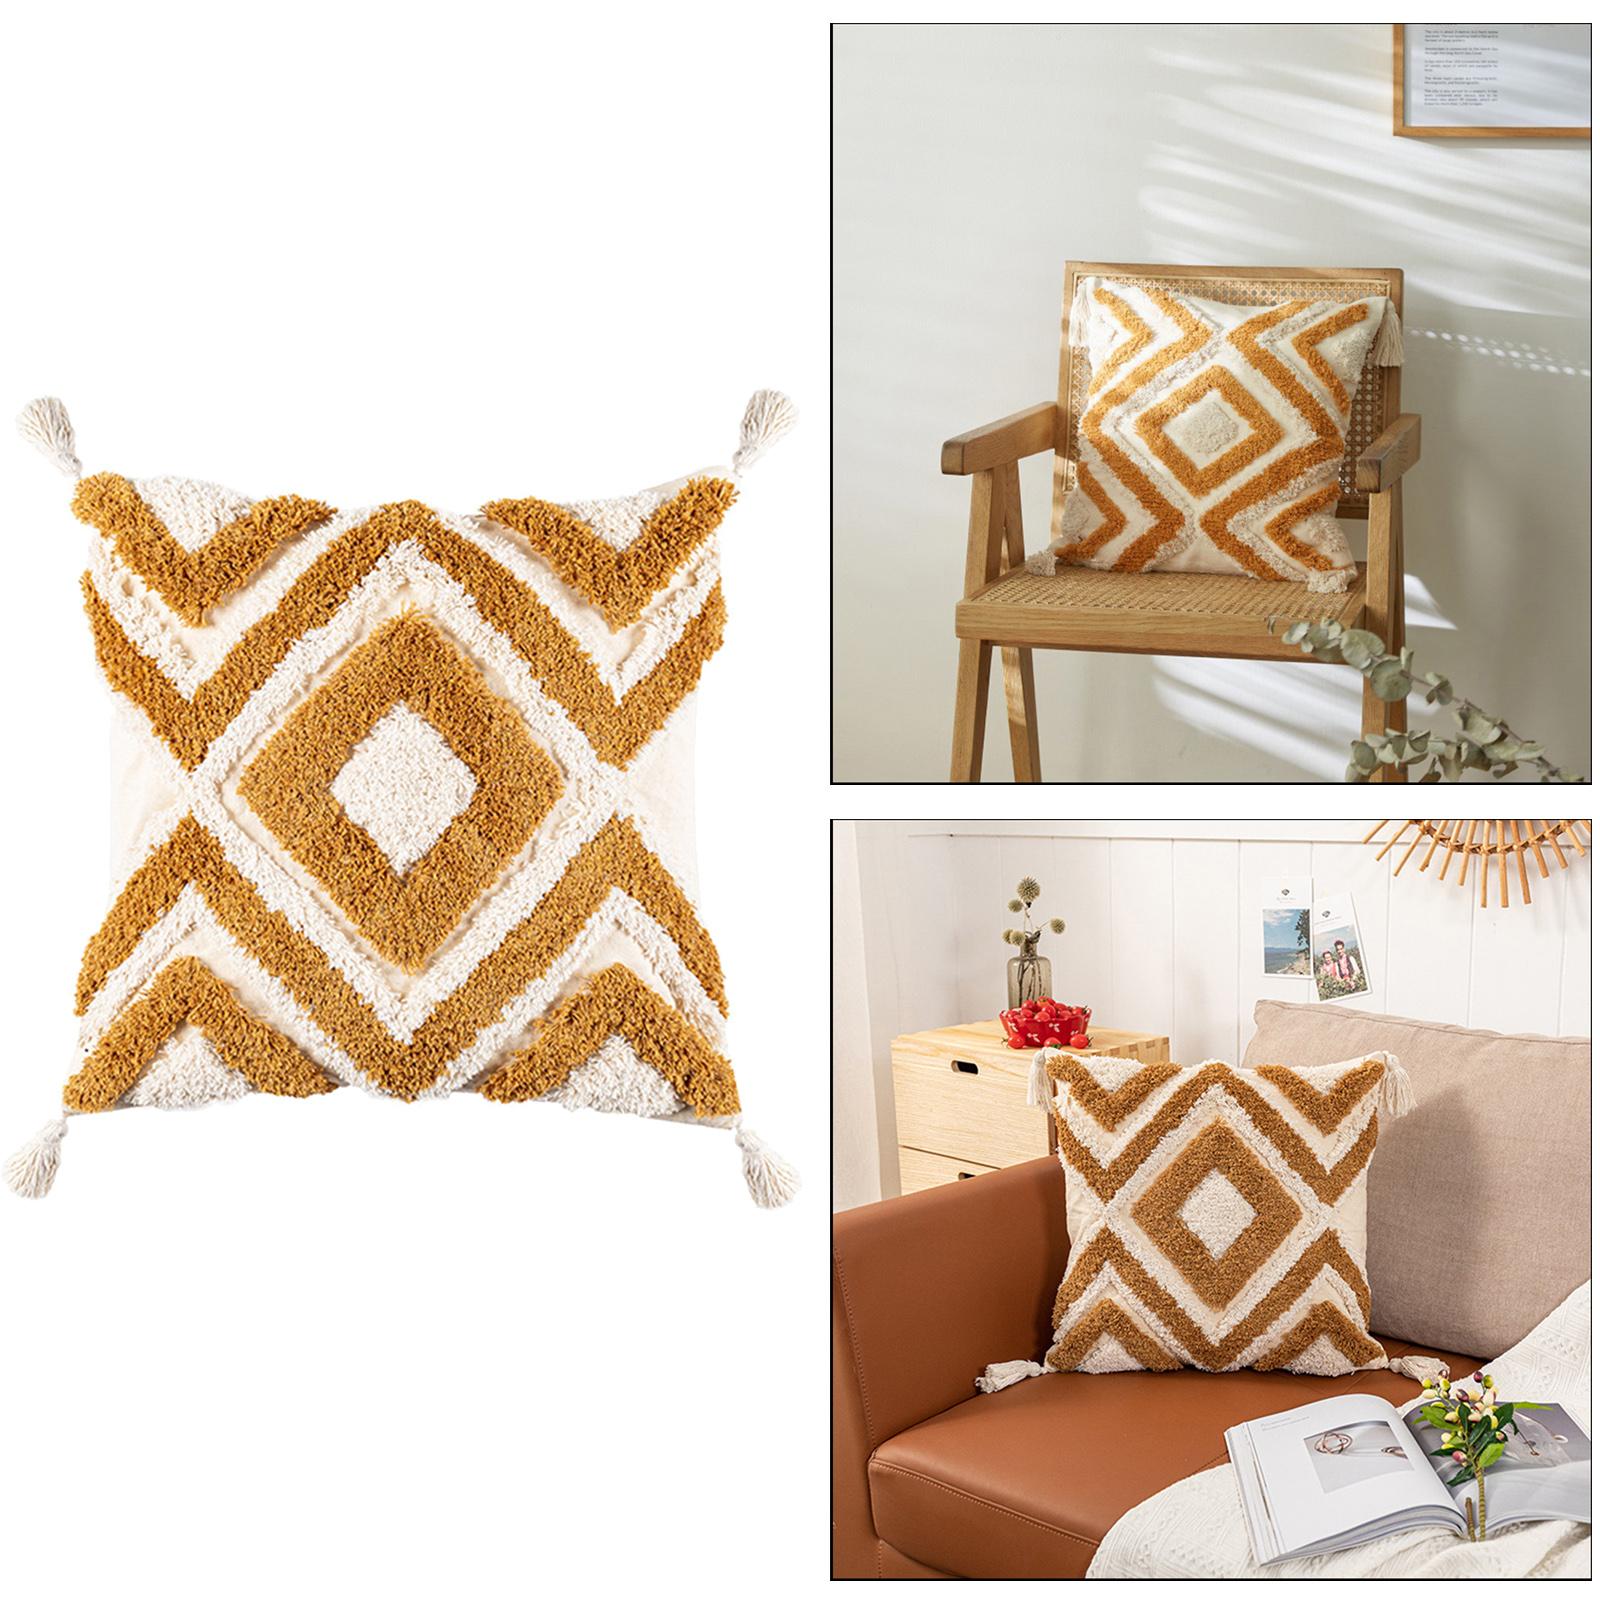 Boho Sofa Lumbar Pillow Cover, Woven Tufted Decorative Pillow Covers Geometric Pillowcase for Couch Bedroom Living Room Car